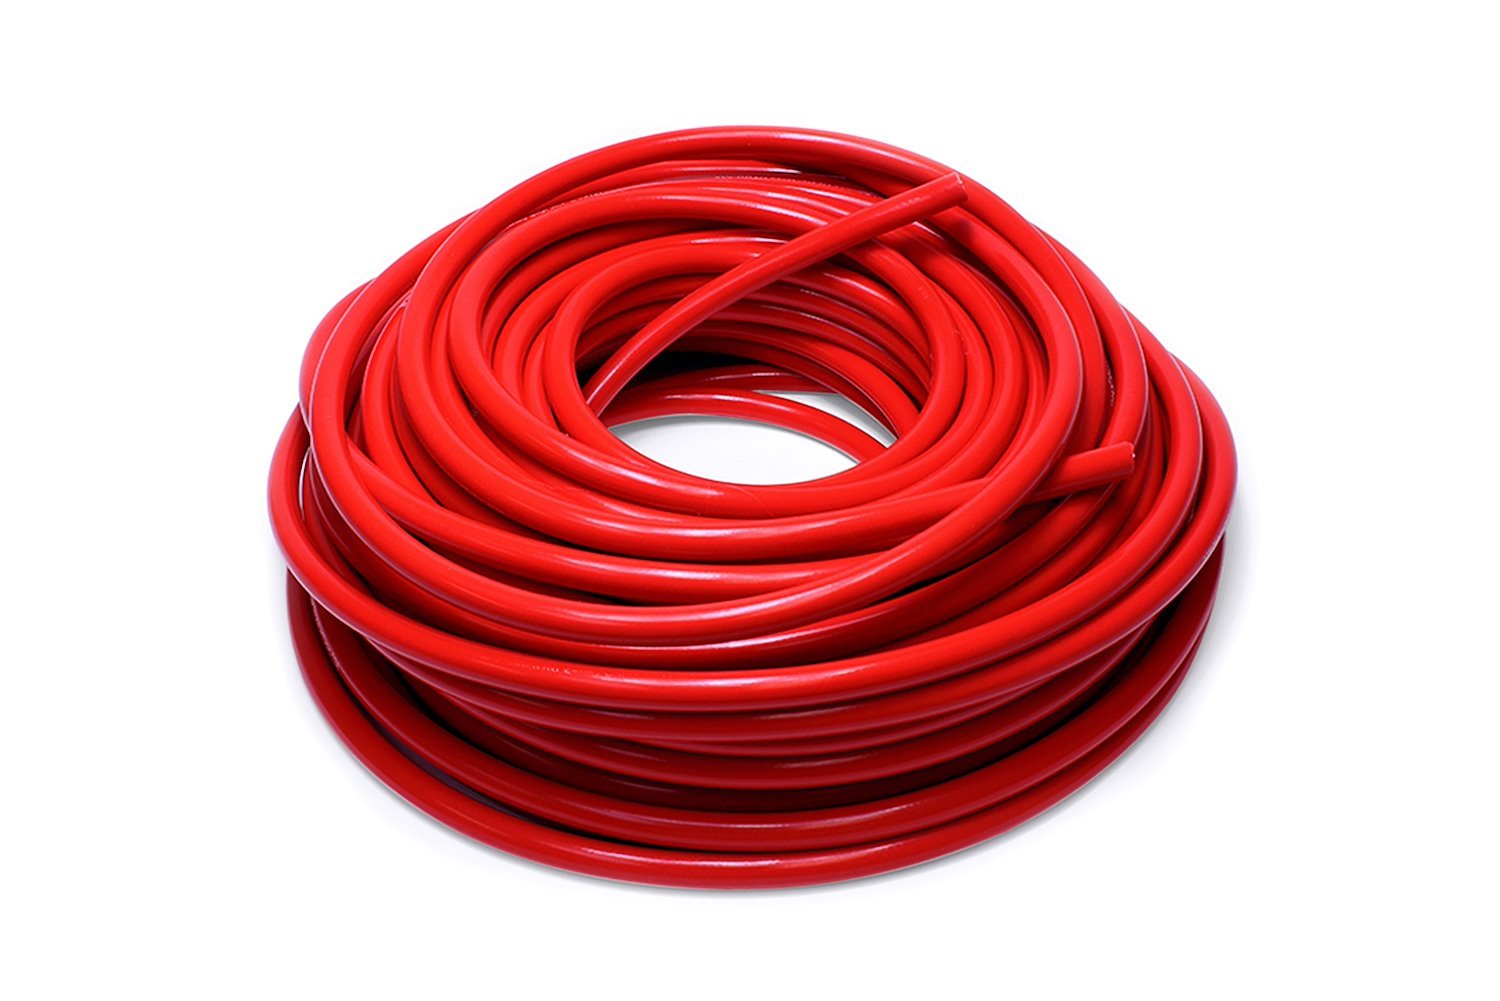 HTHH-013-REDx250 Silicone Heater Hose Tubing, High-Temp Reinforced, 1/8 in. ID, 250 ft. Roll, Red